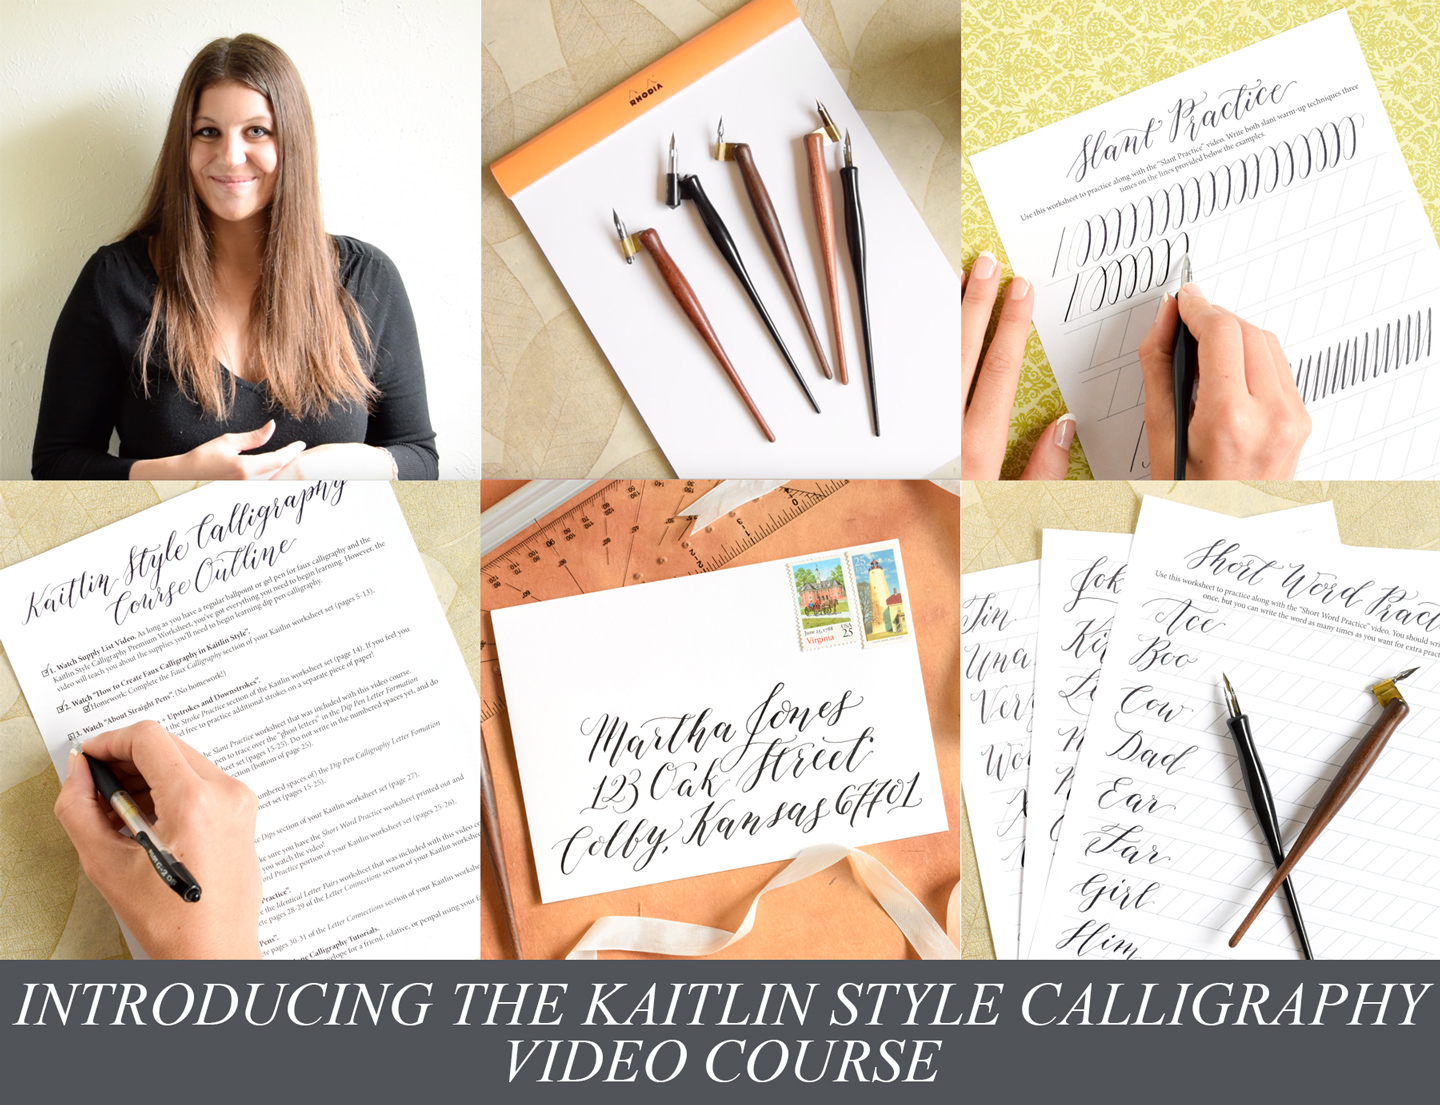 Introducing the Kaitlin Style Calligraphy Video Course